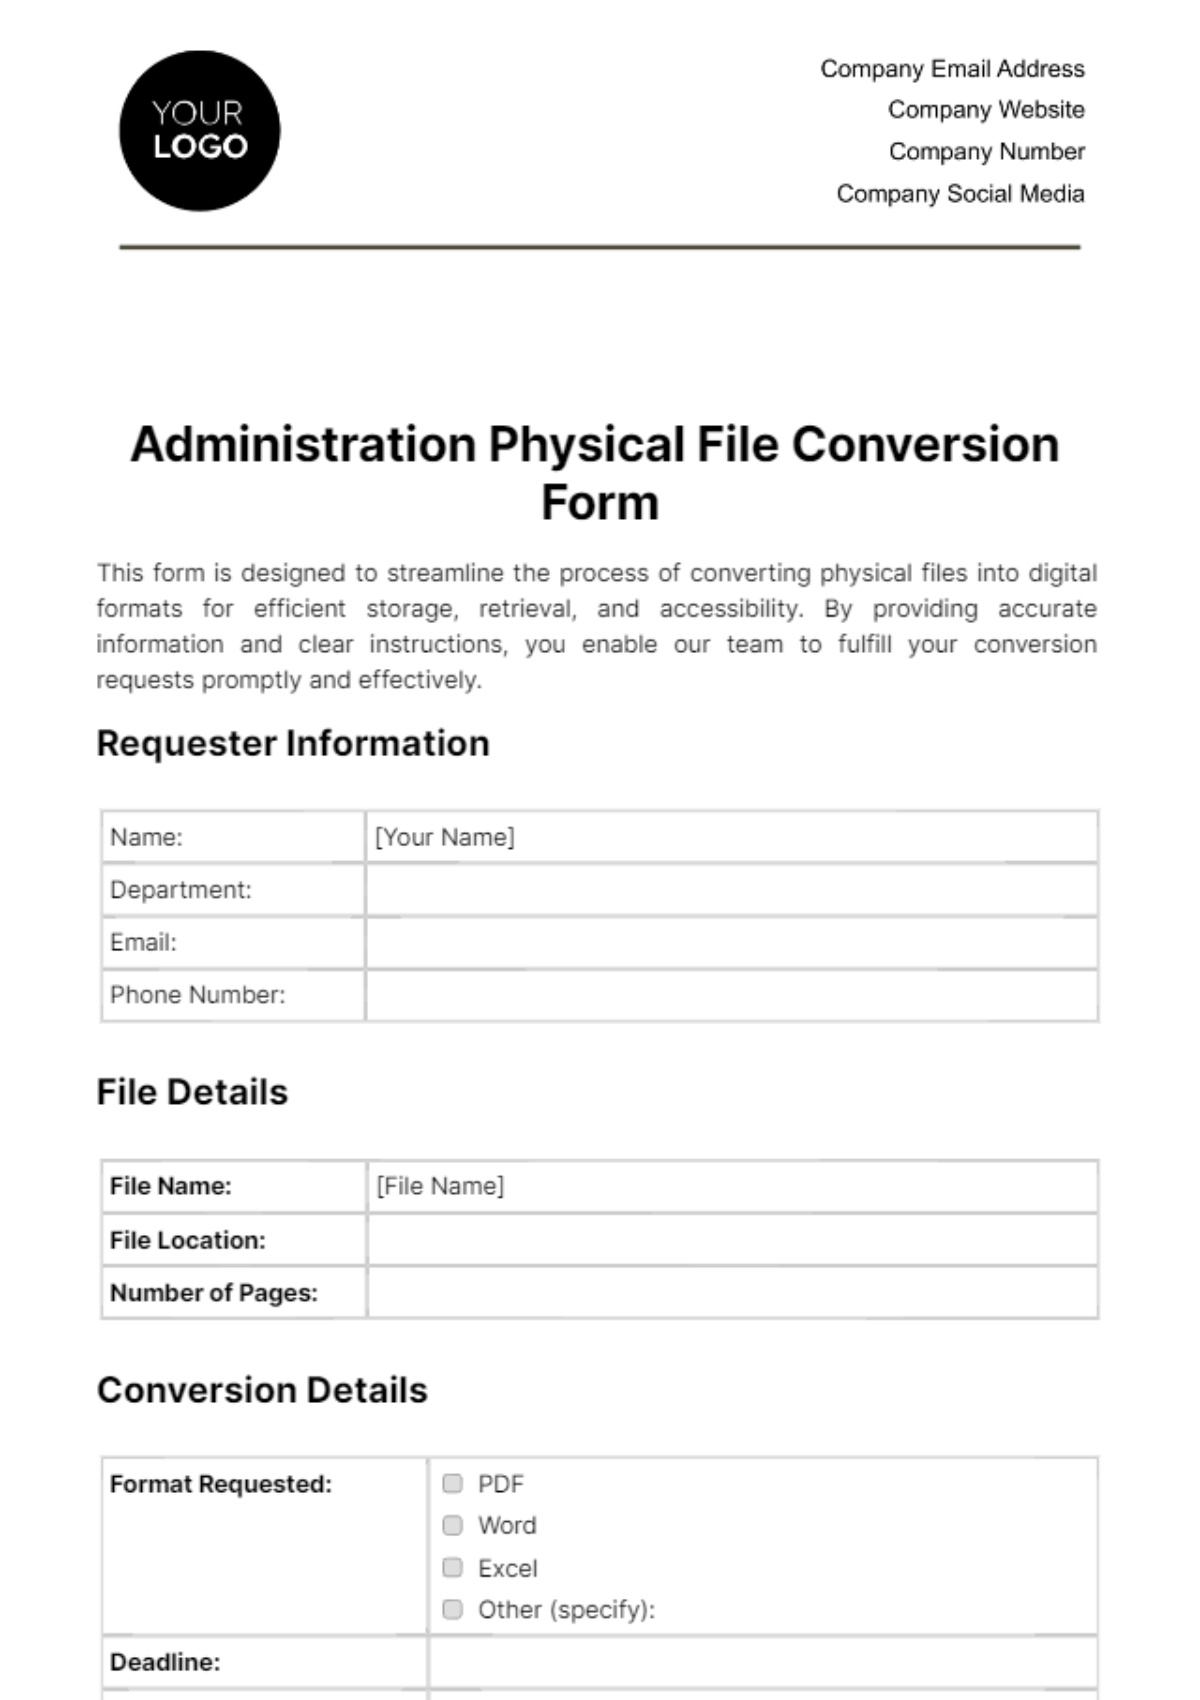 Administration Physical File Conversion Form Template